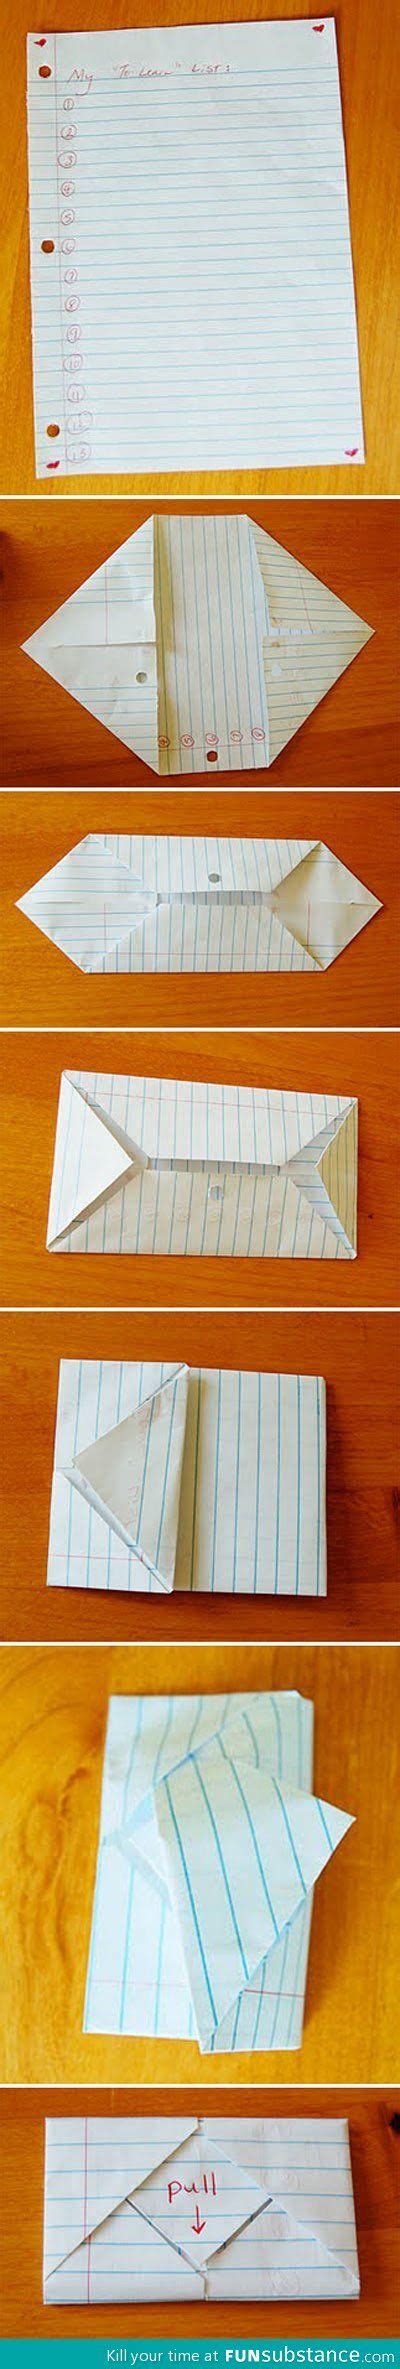 How To Fold A Note Envelope Funsubstance Origami Envelope Easy